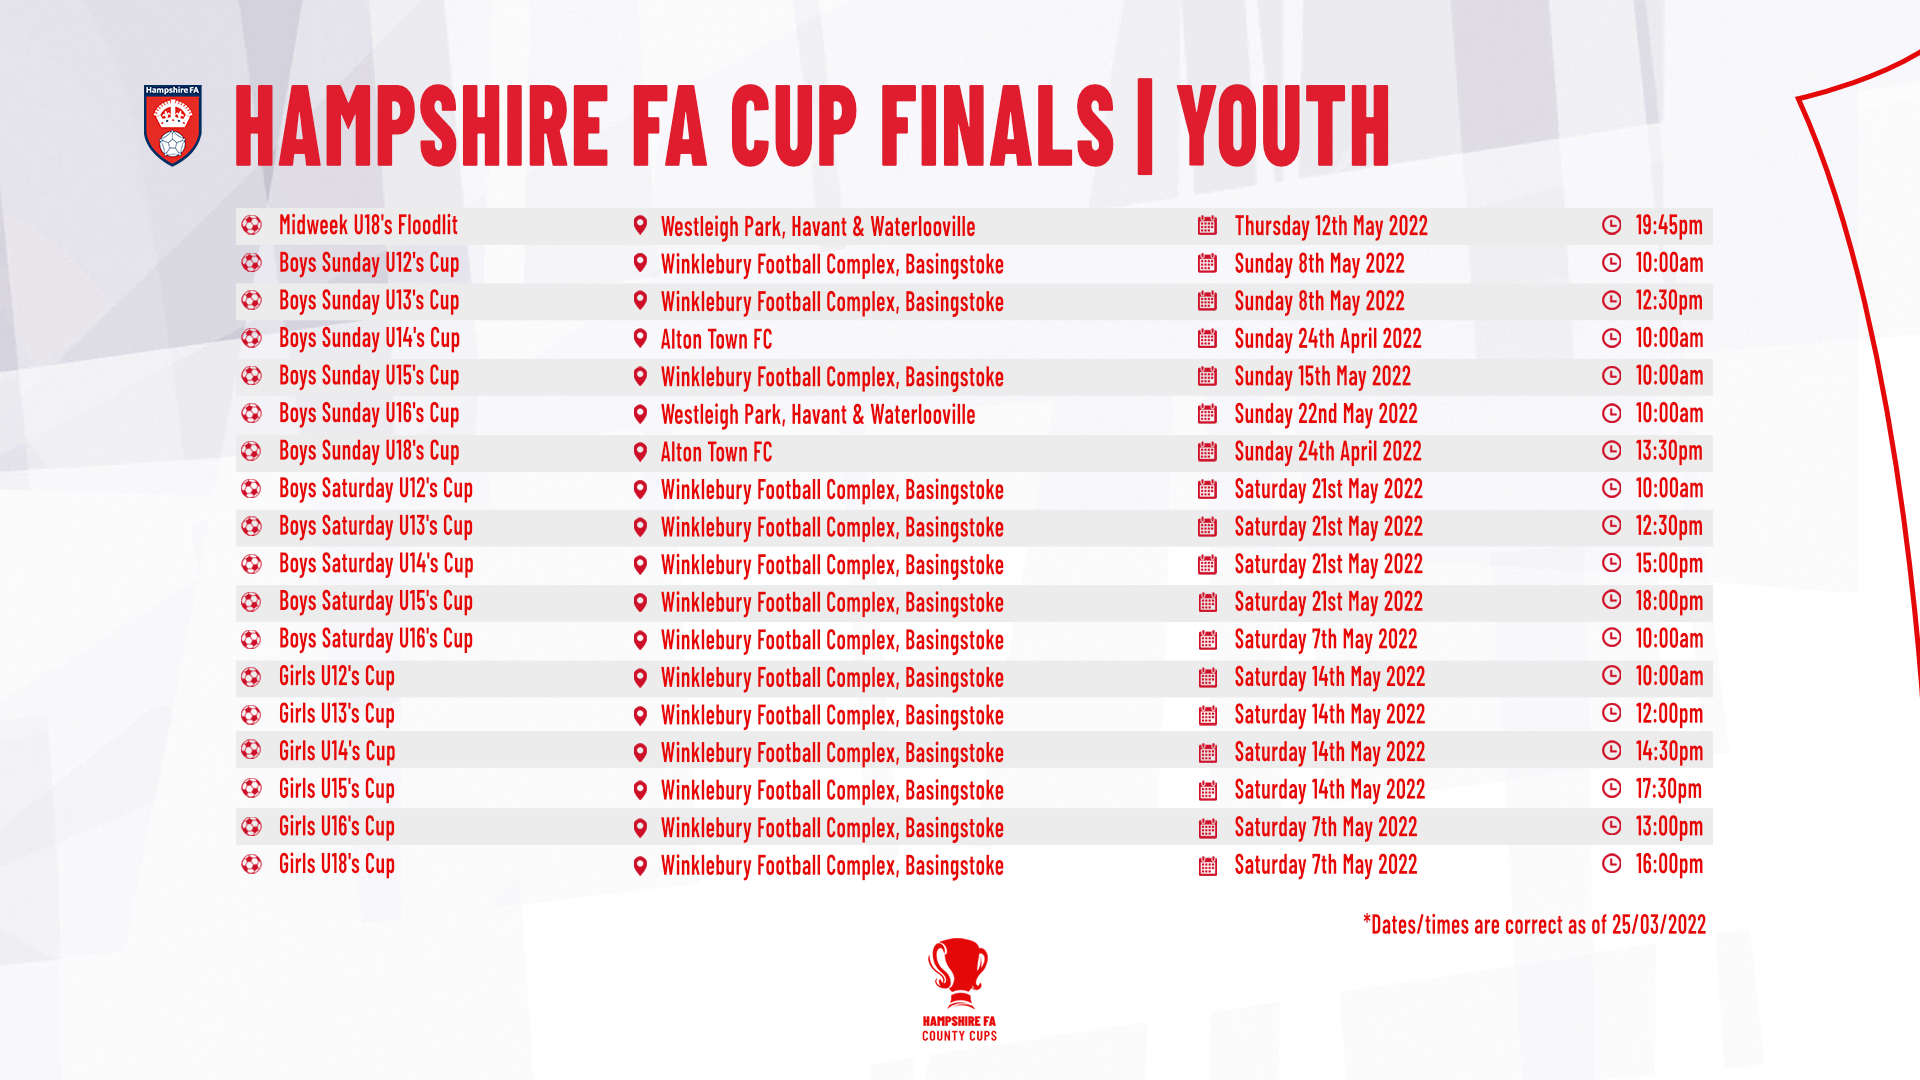 Hampshire FA Youth County Cup Final Dates 2022